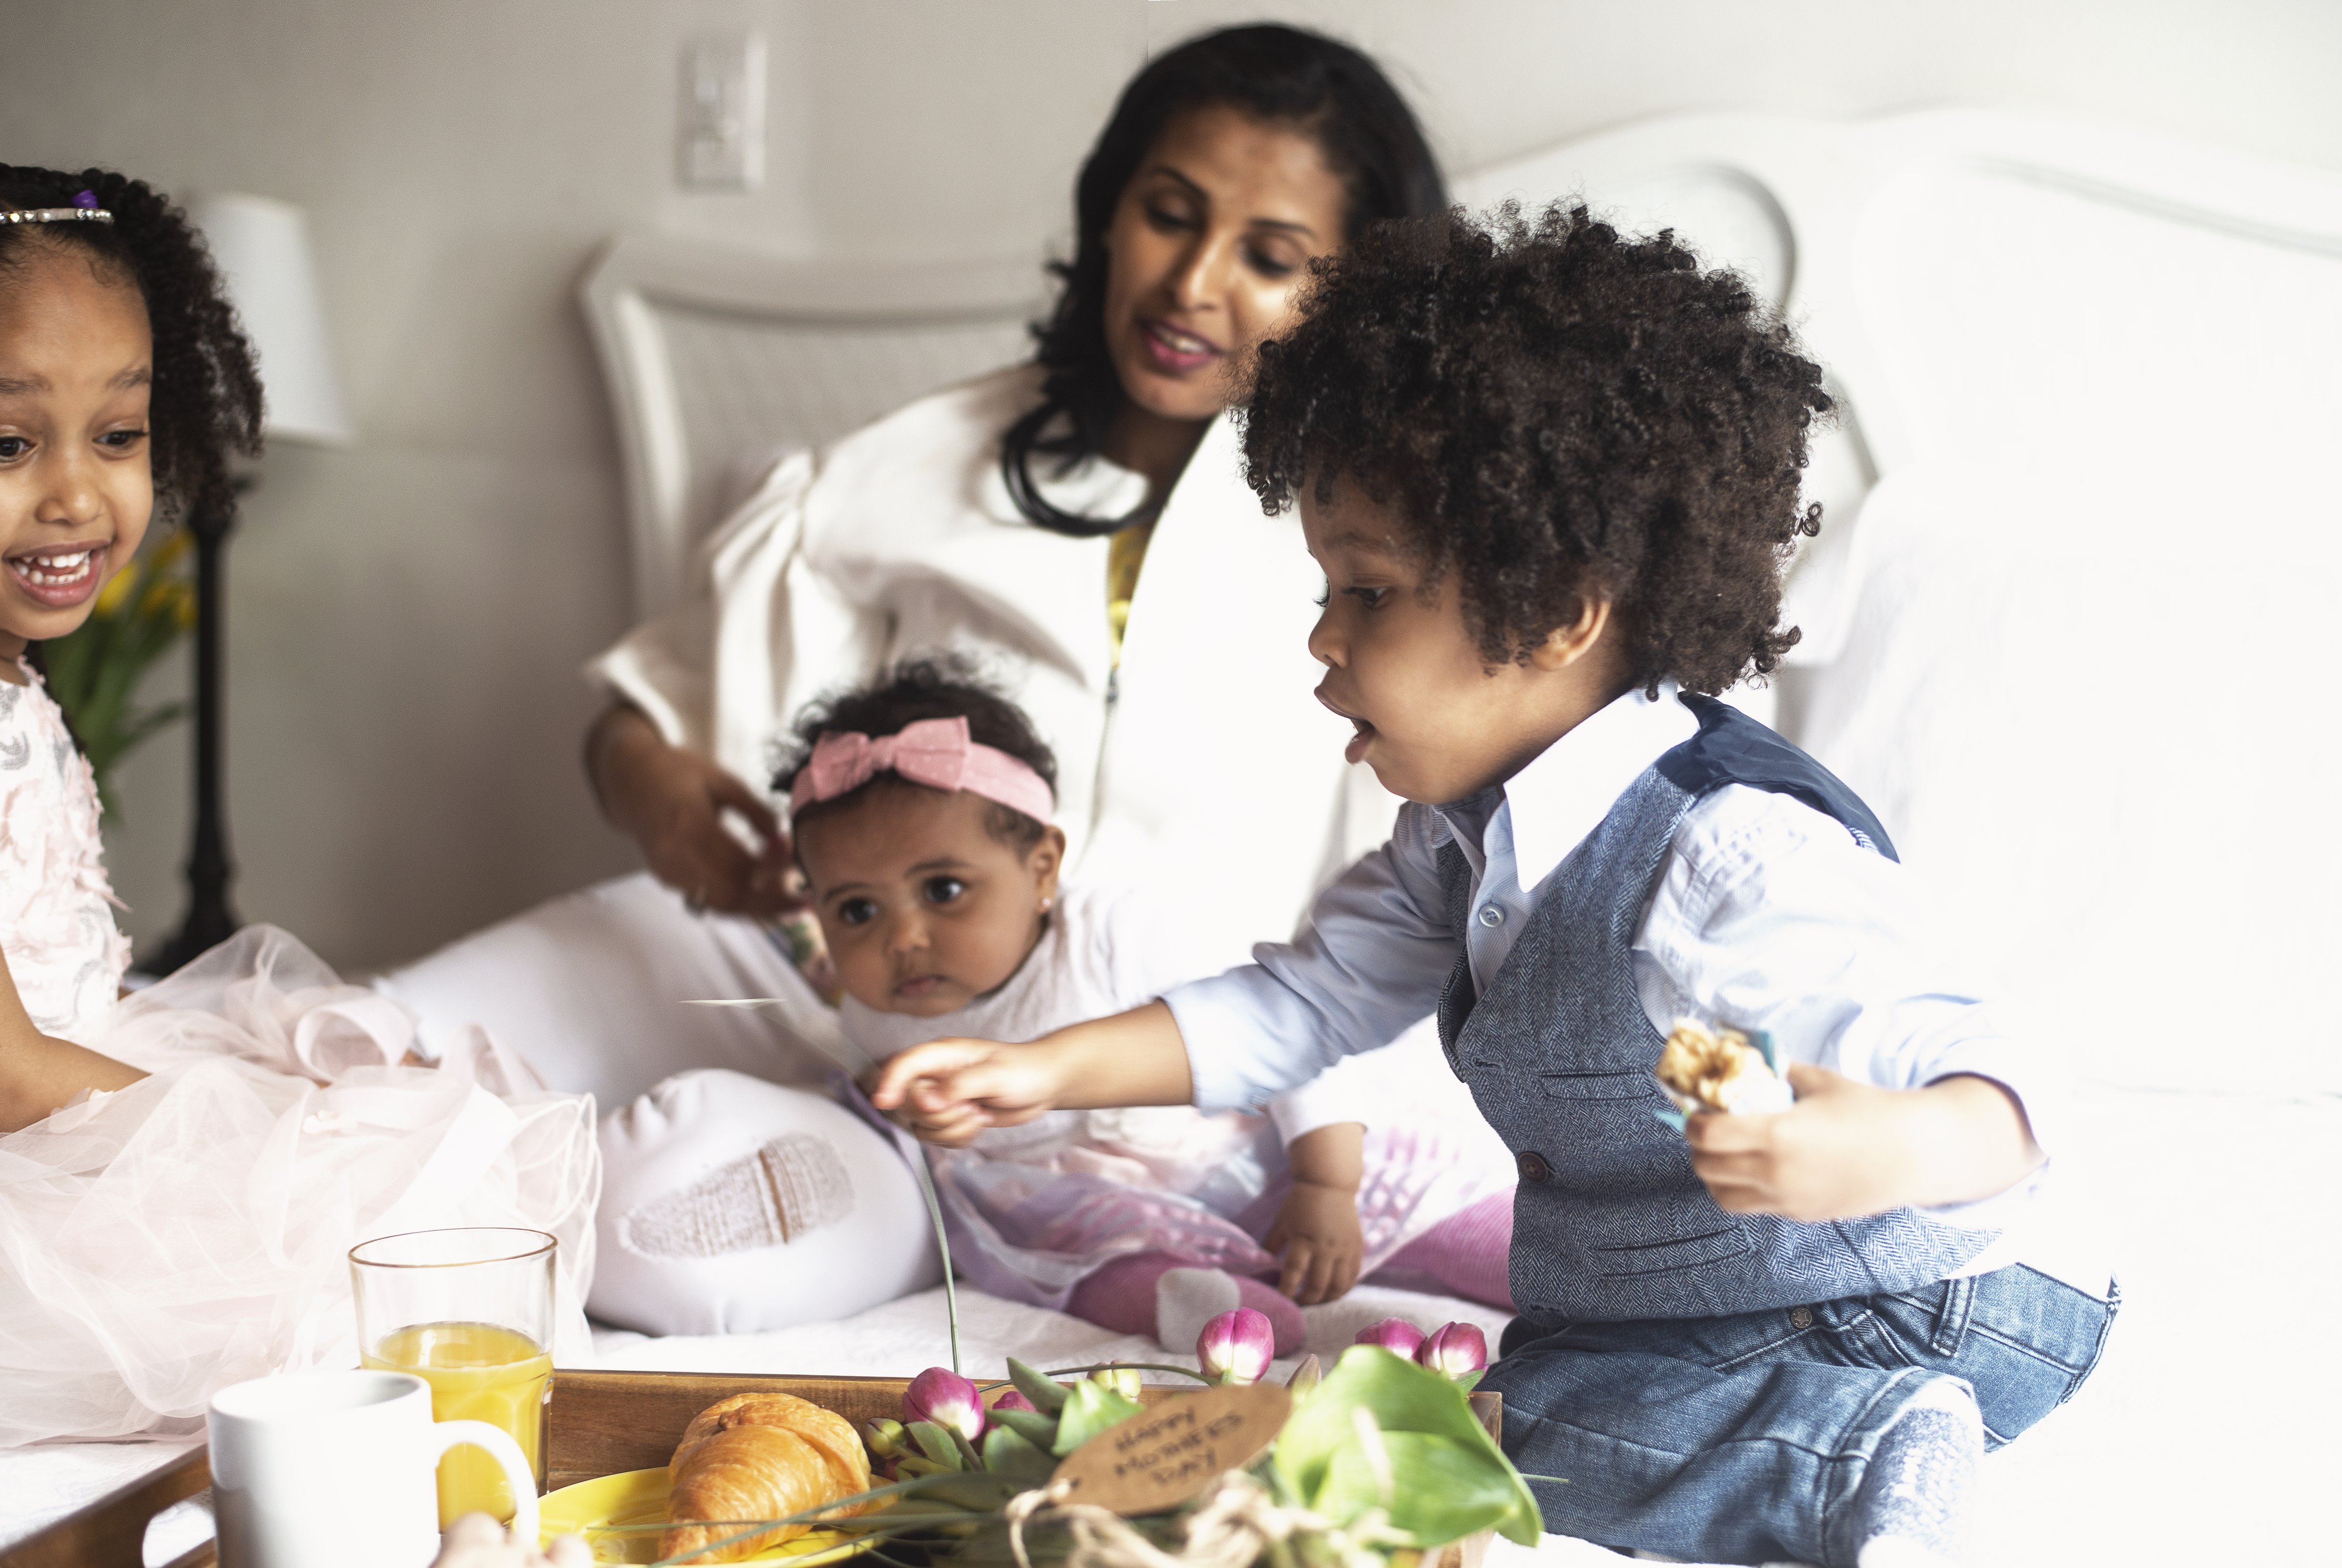 8 tips to eat and live well with your family